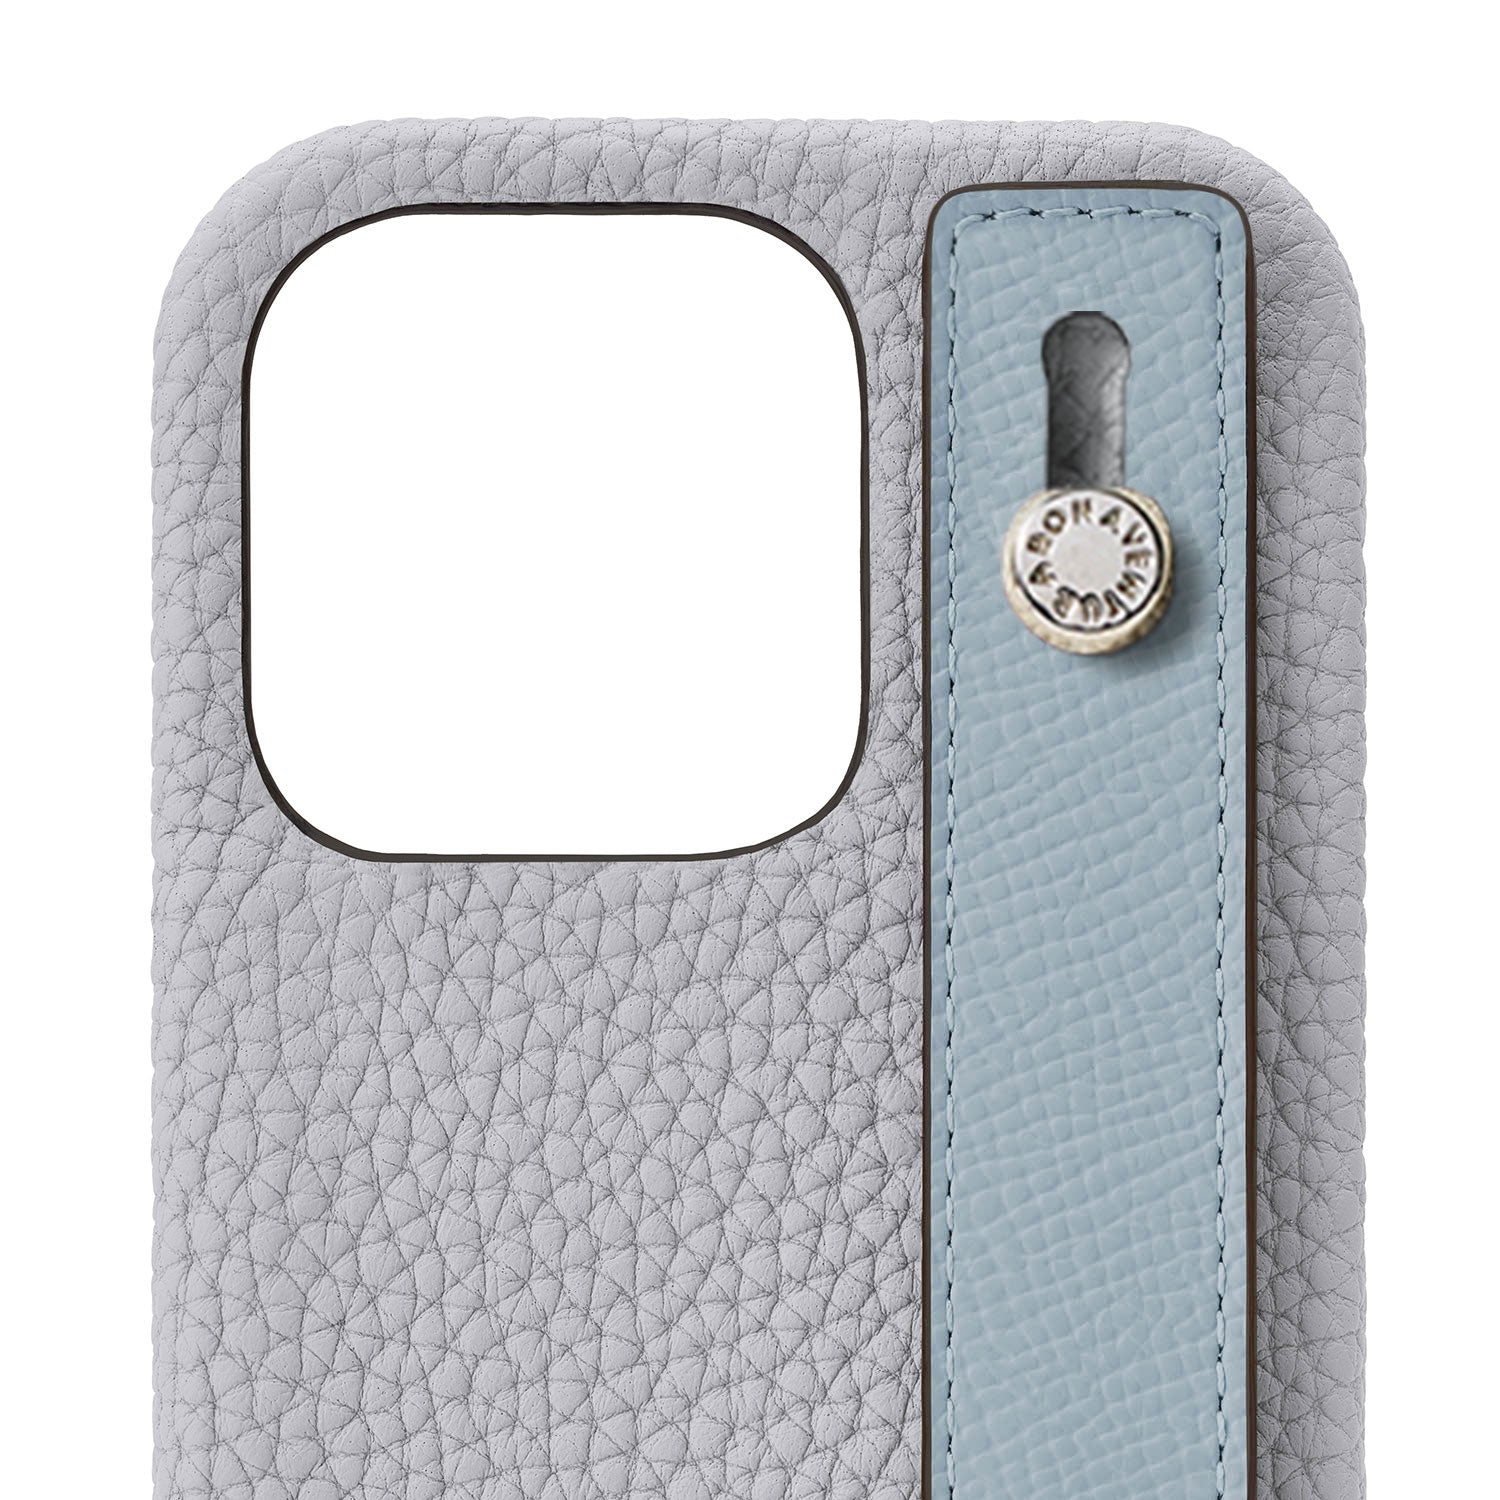 (iPhone 14 Pro Max) Back cover case with handle, shrink leather